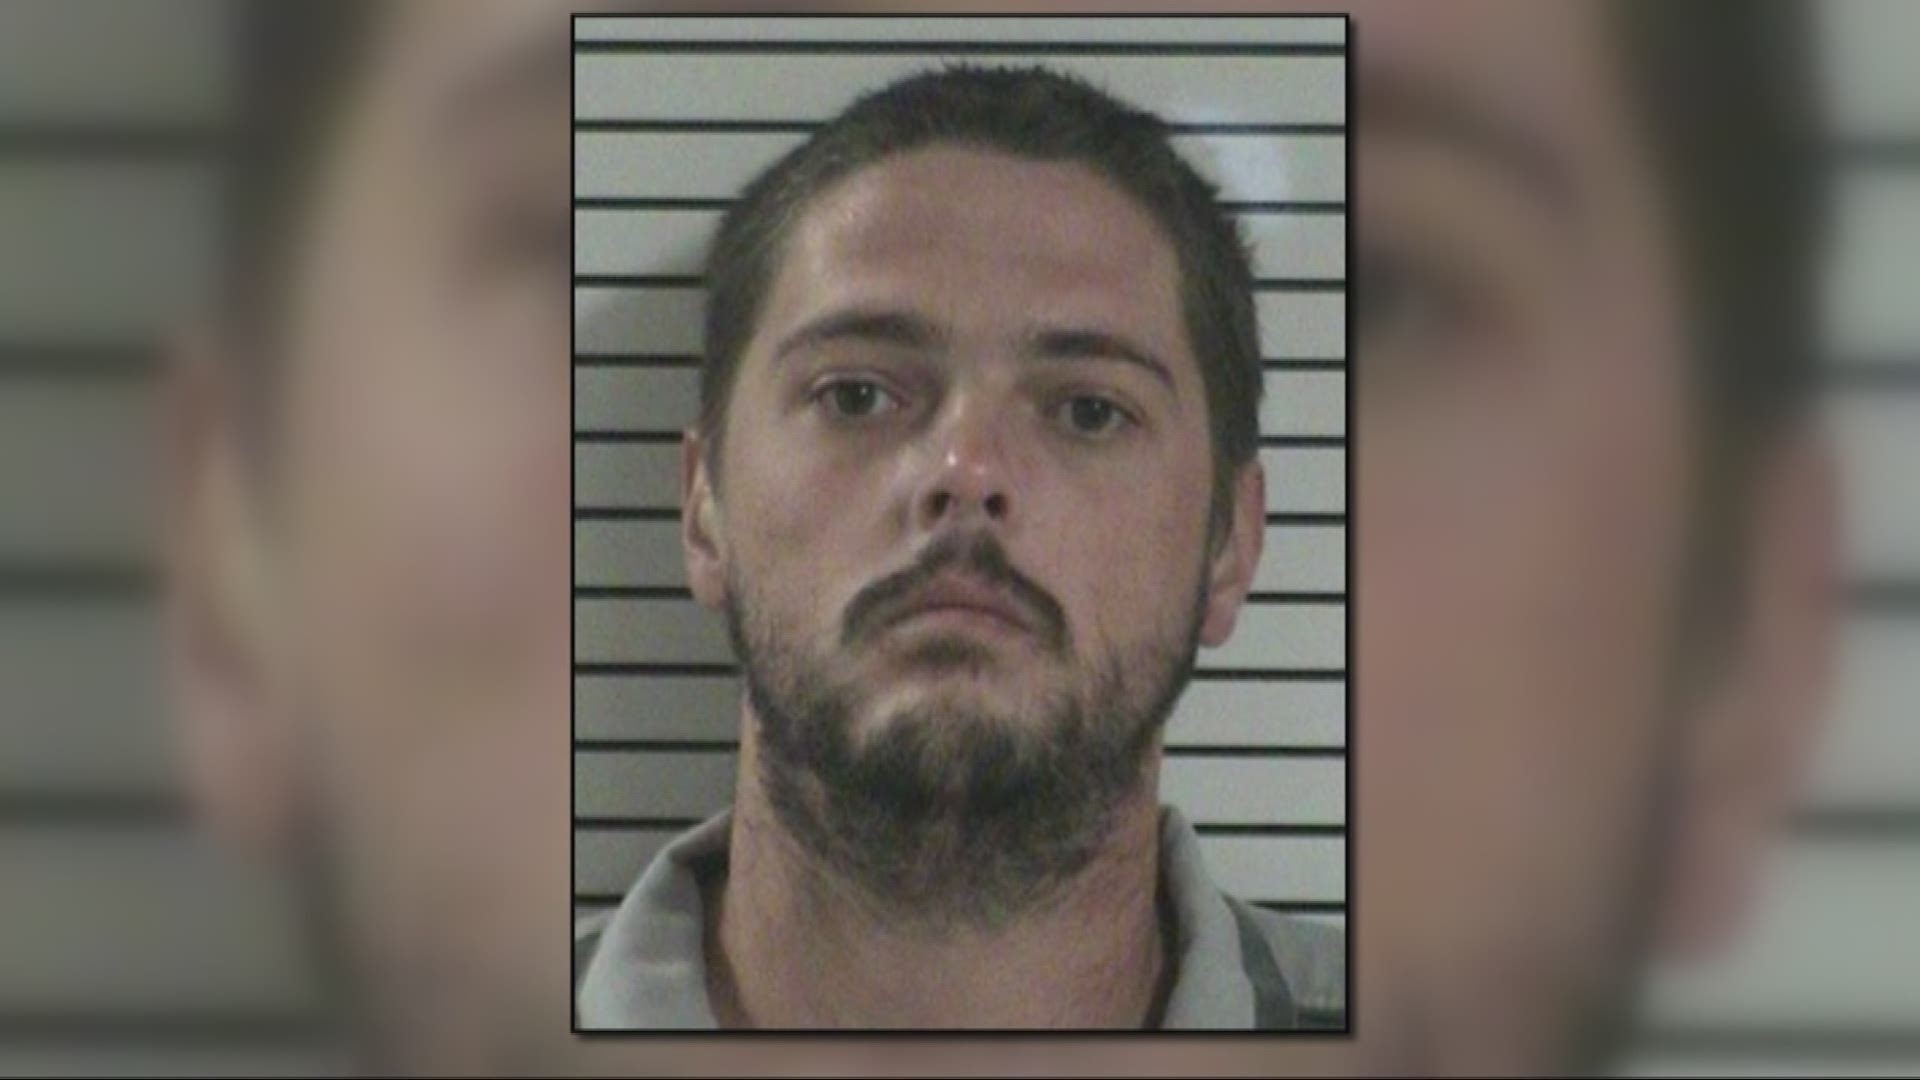 An Iredell County man has been arrested charged with the sexual assault of a seven year old.